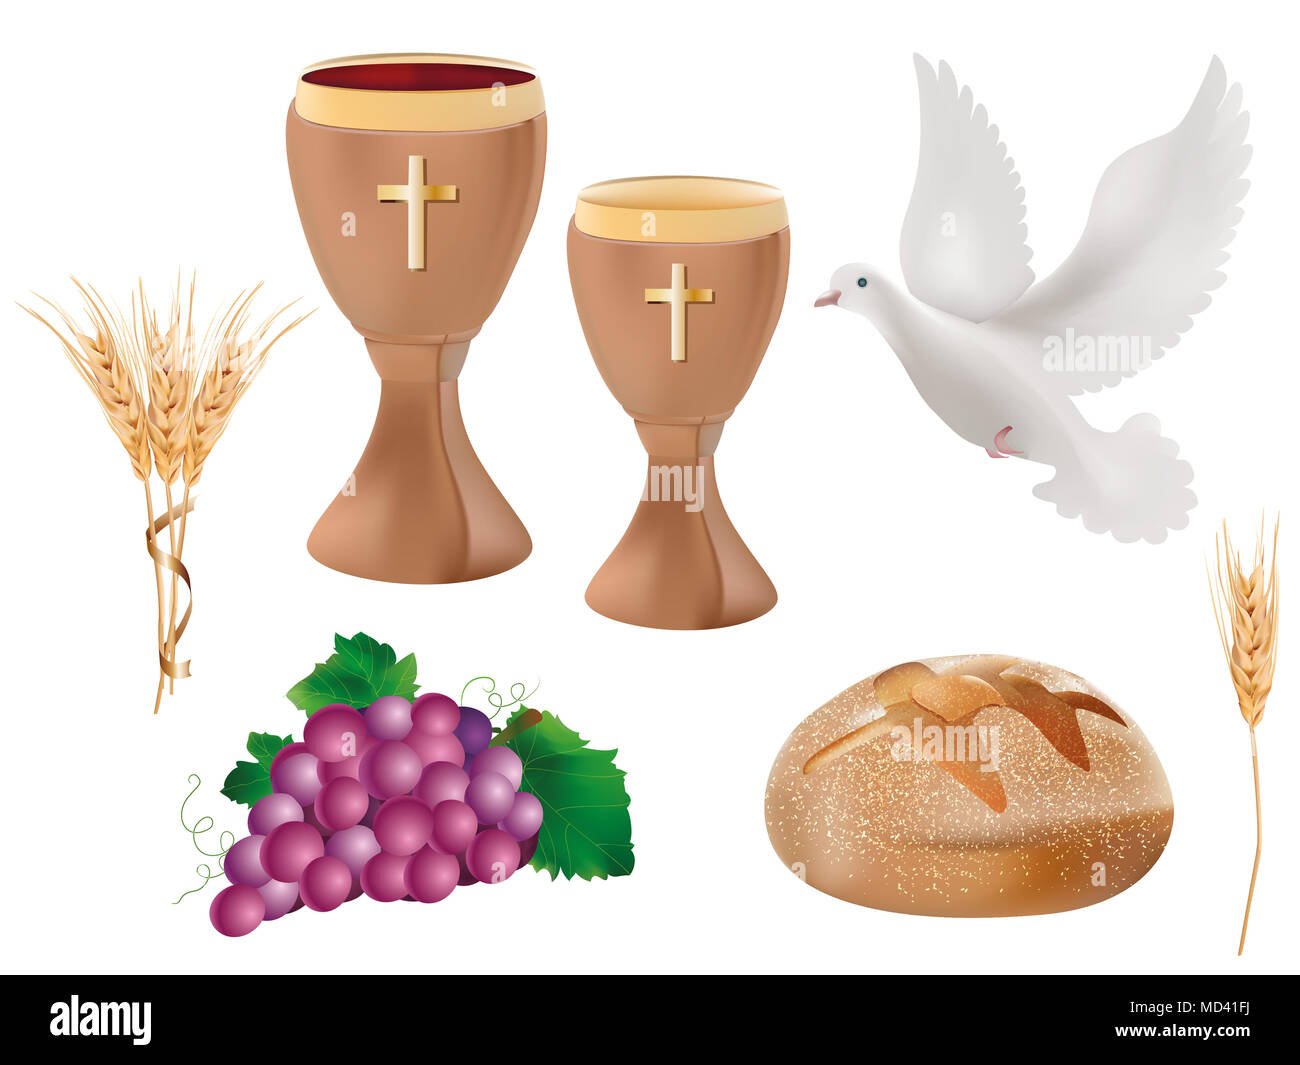 Isolated christian symbols: wood chalice with wine, dove, grapes, bread, ears of wheat. Christian signs. Last supper symbols.3D realistic illustration Stock Photo